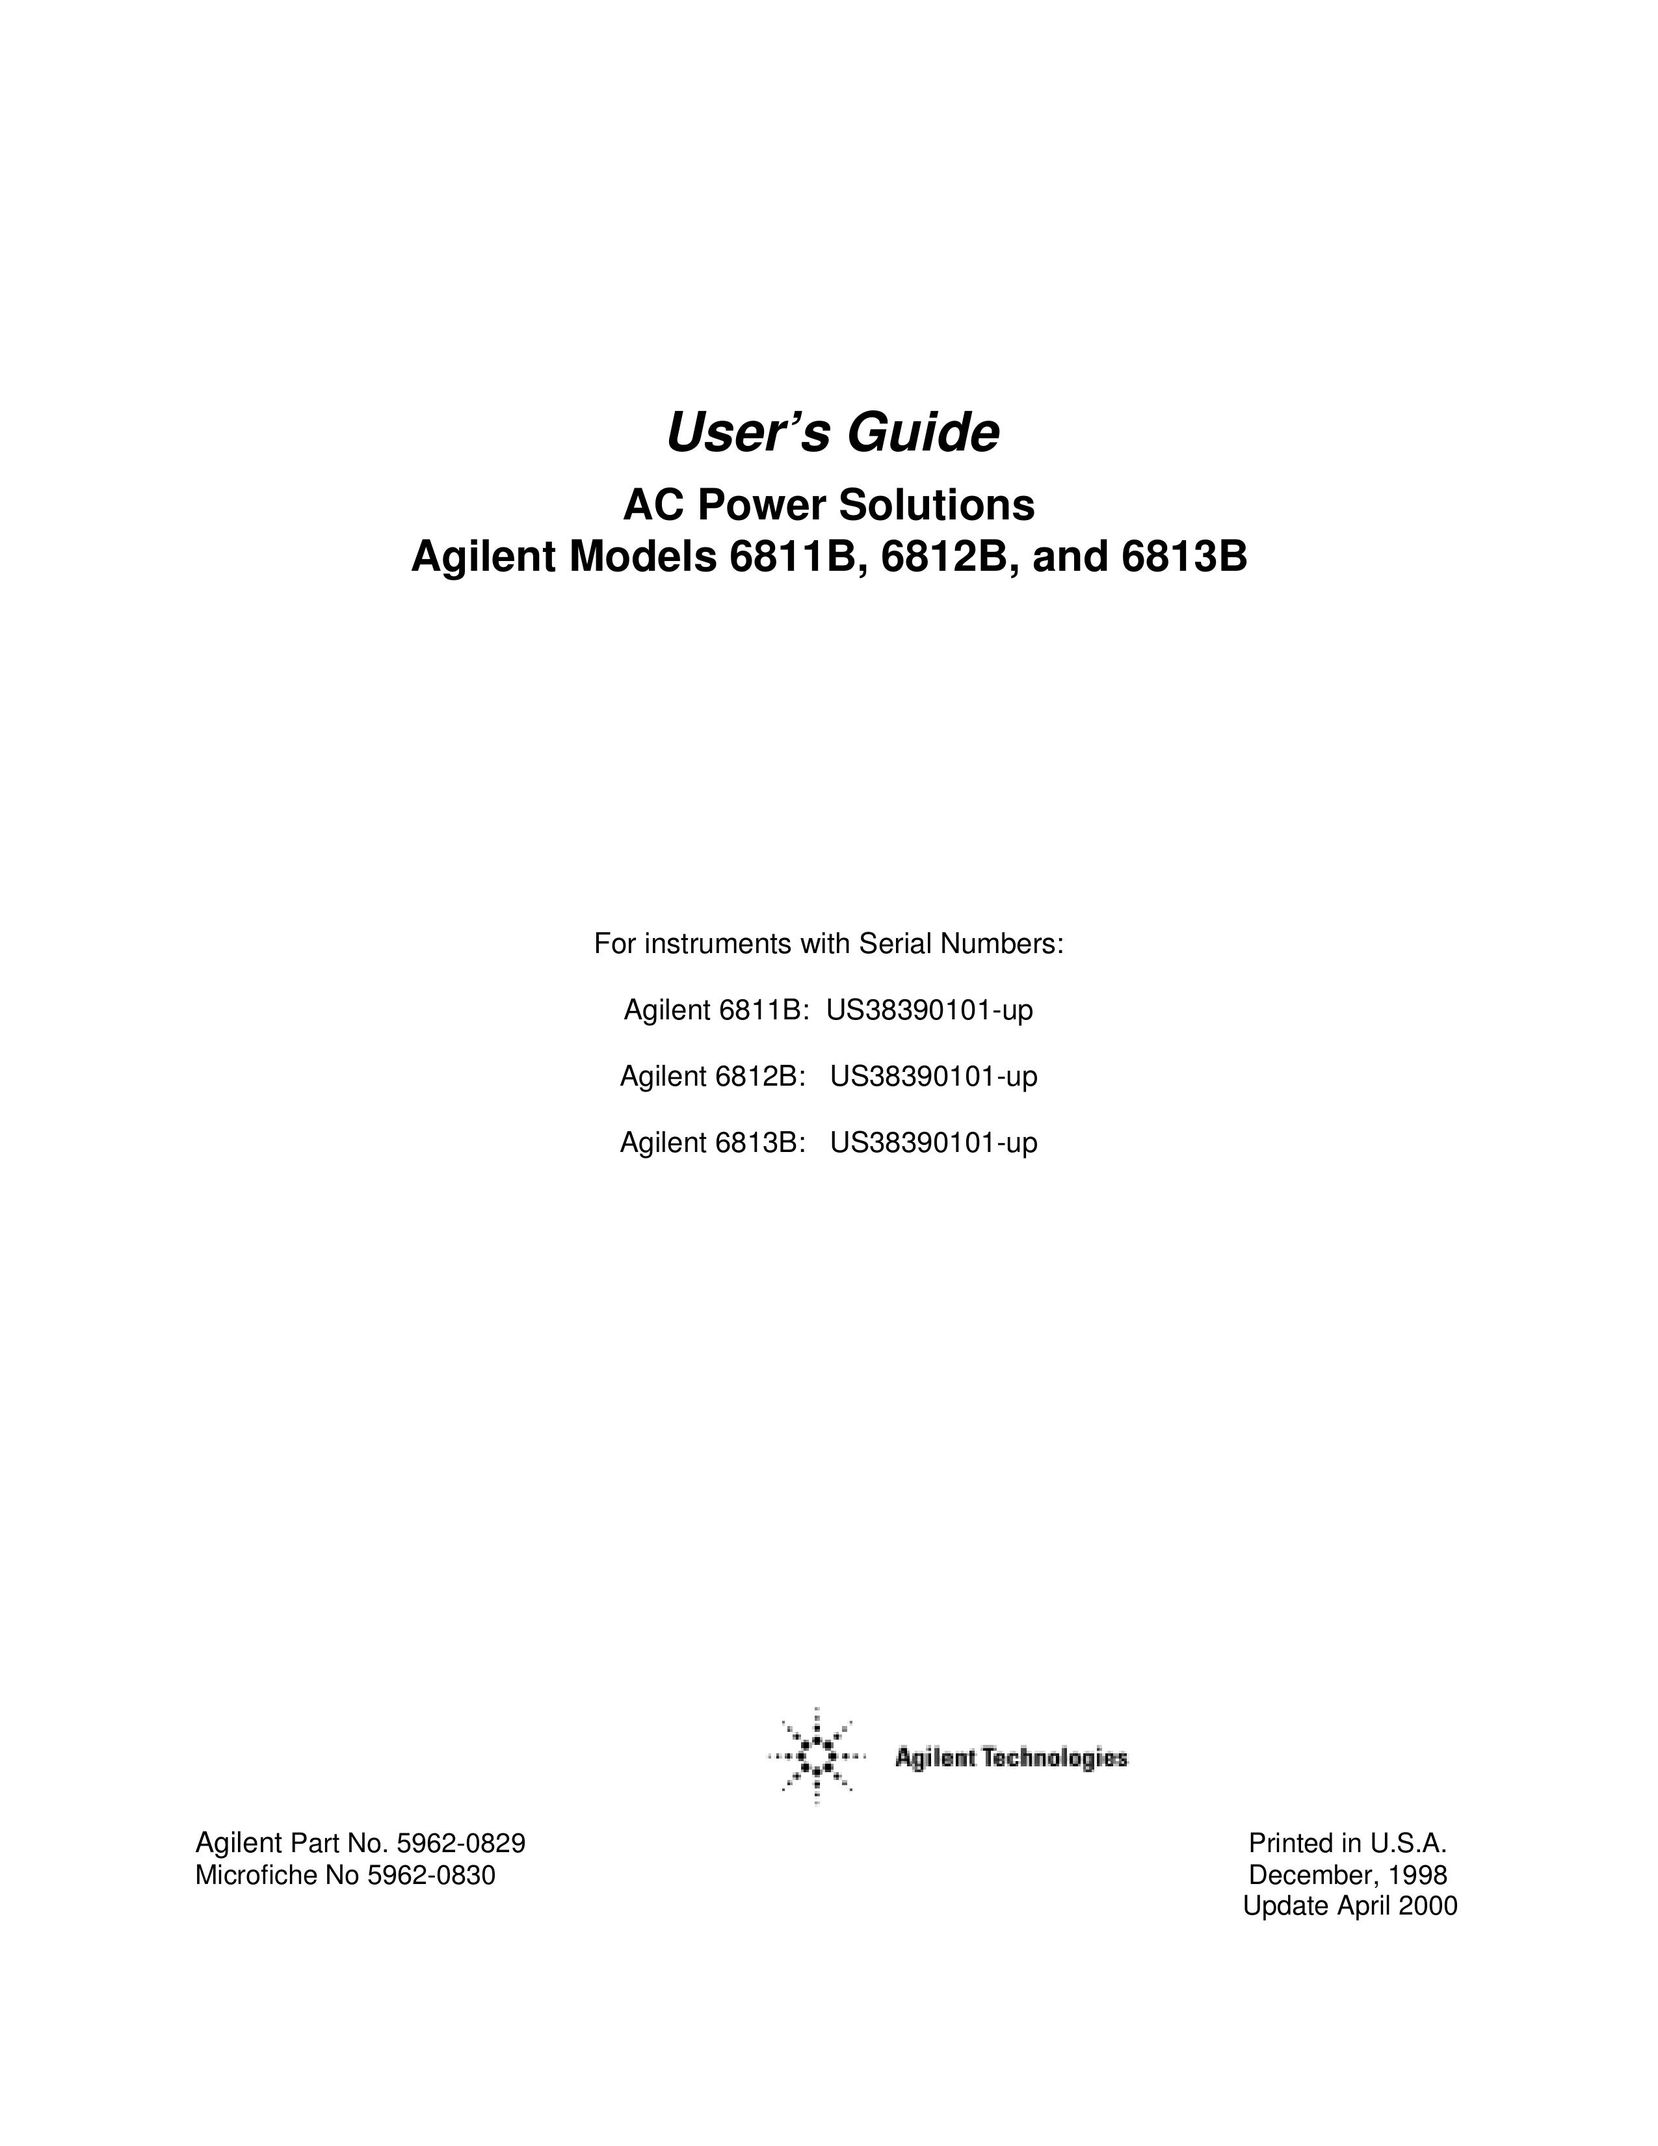 Agilent Technologies 6811B Video Gaming Accessories User Manual (Page 1)